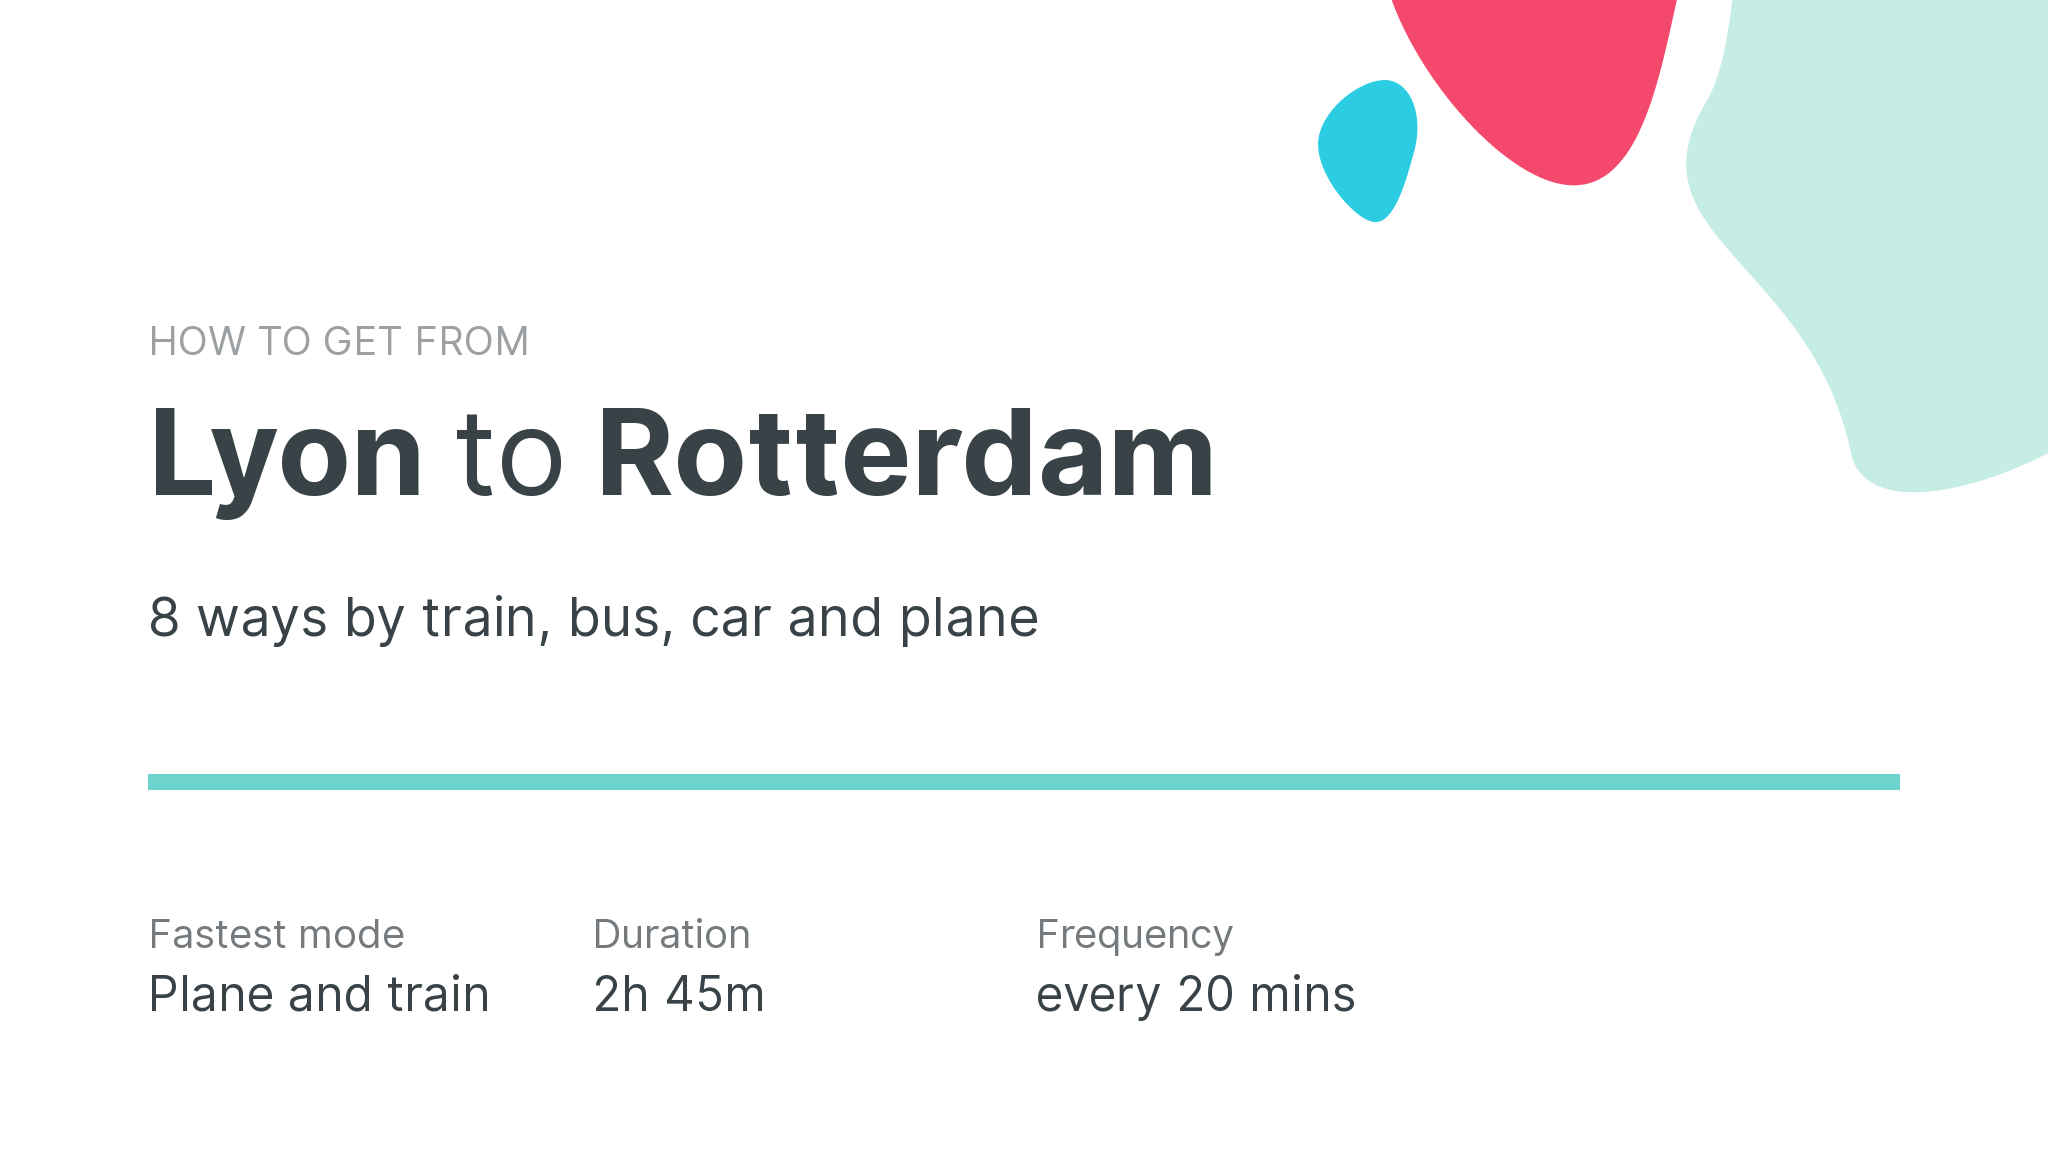 How do I get from Lyon to Rotterdam